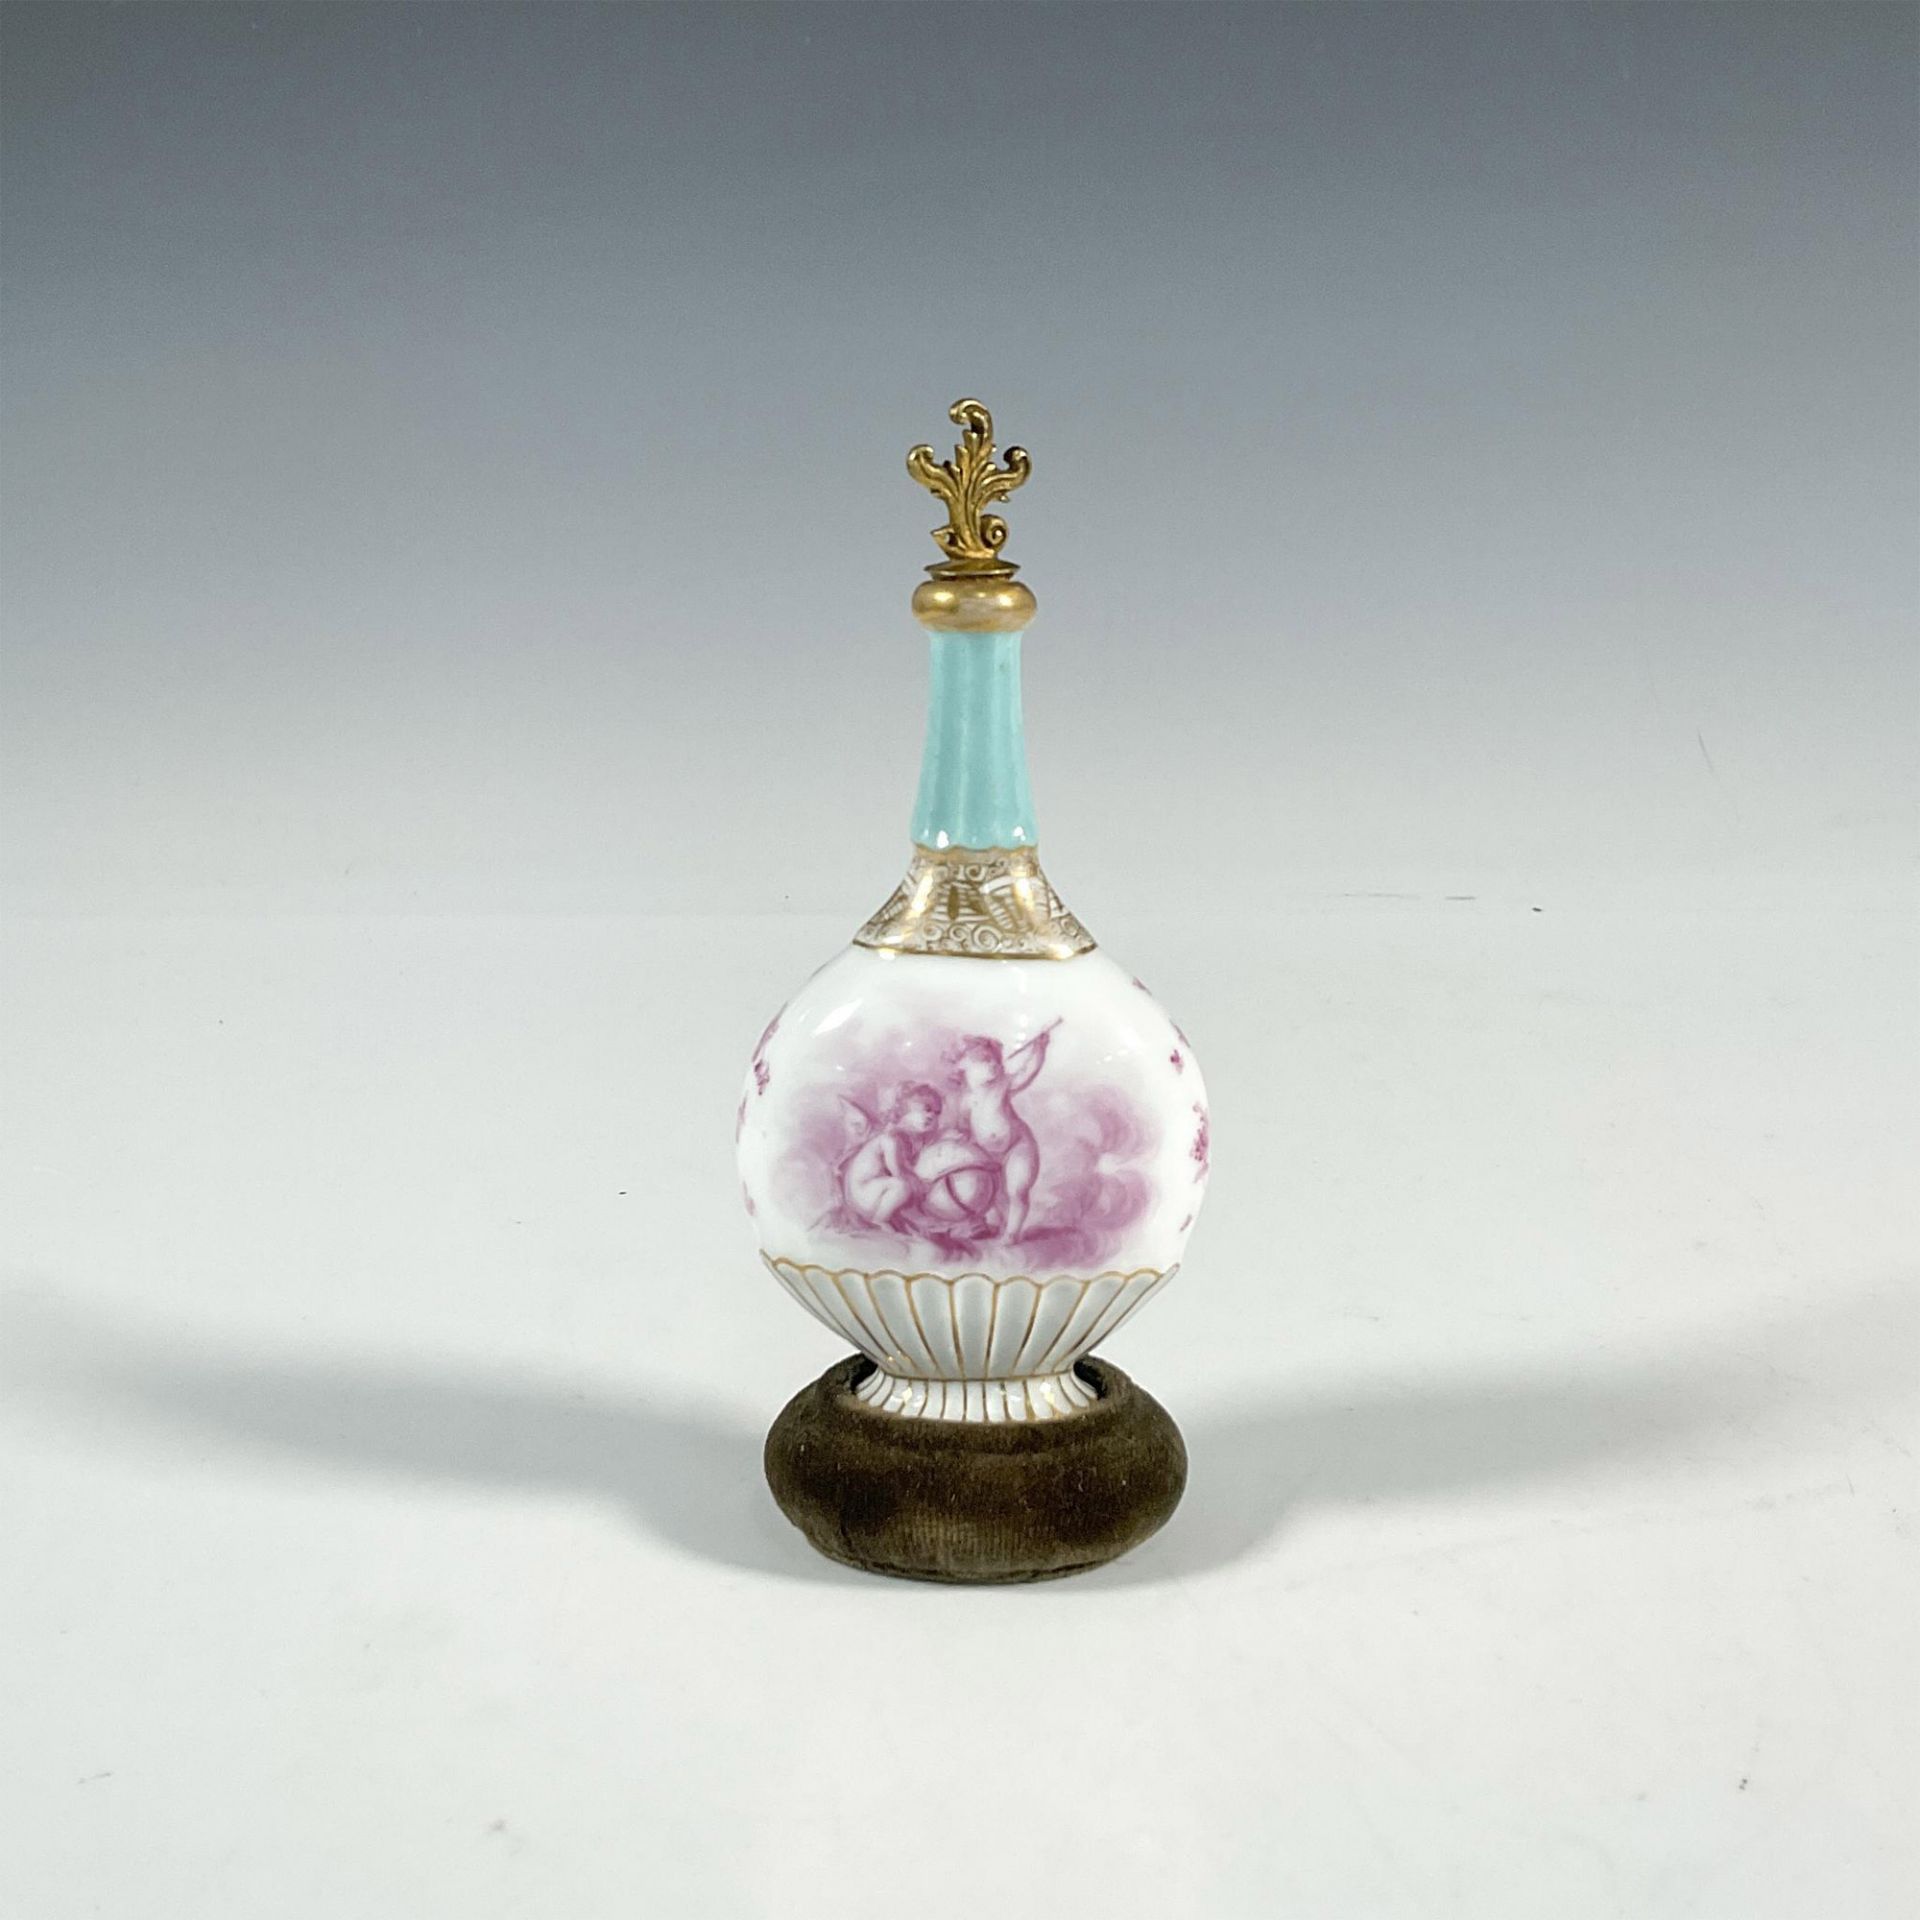 18th Century European Porcelain Scent Bottle and Stopper - Image 2 of 5